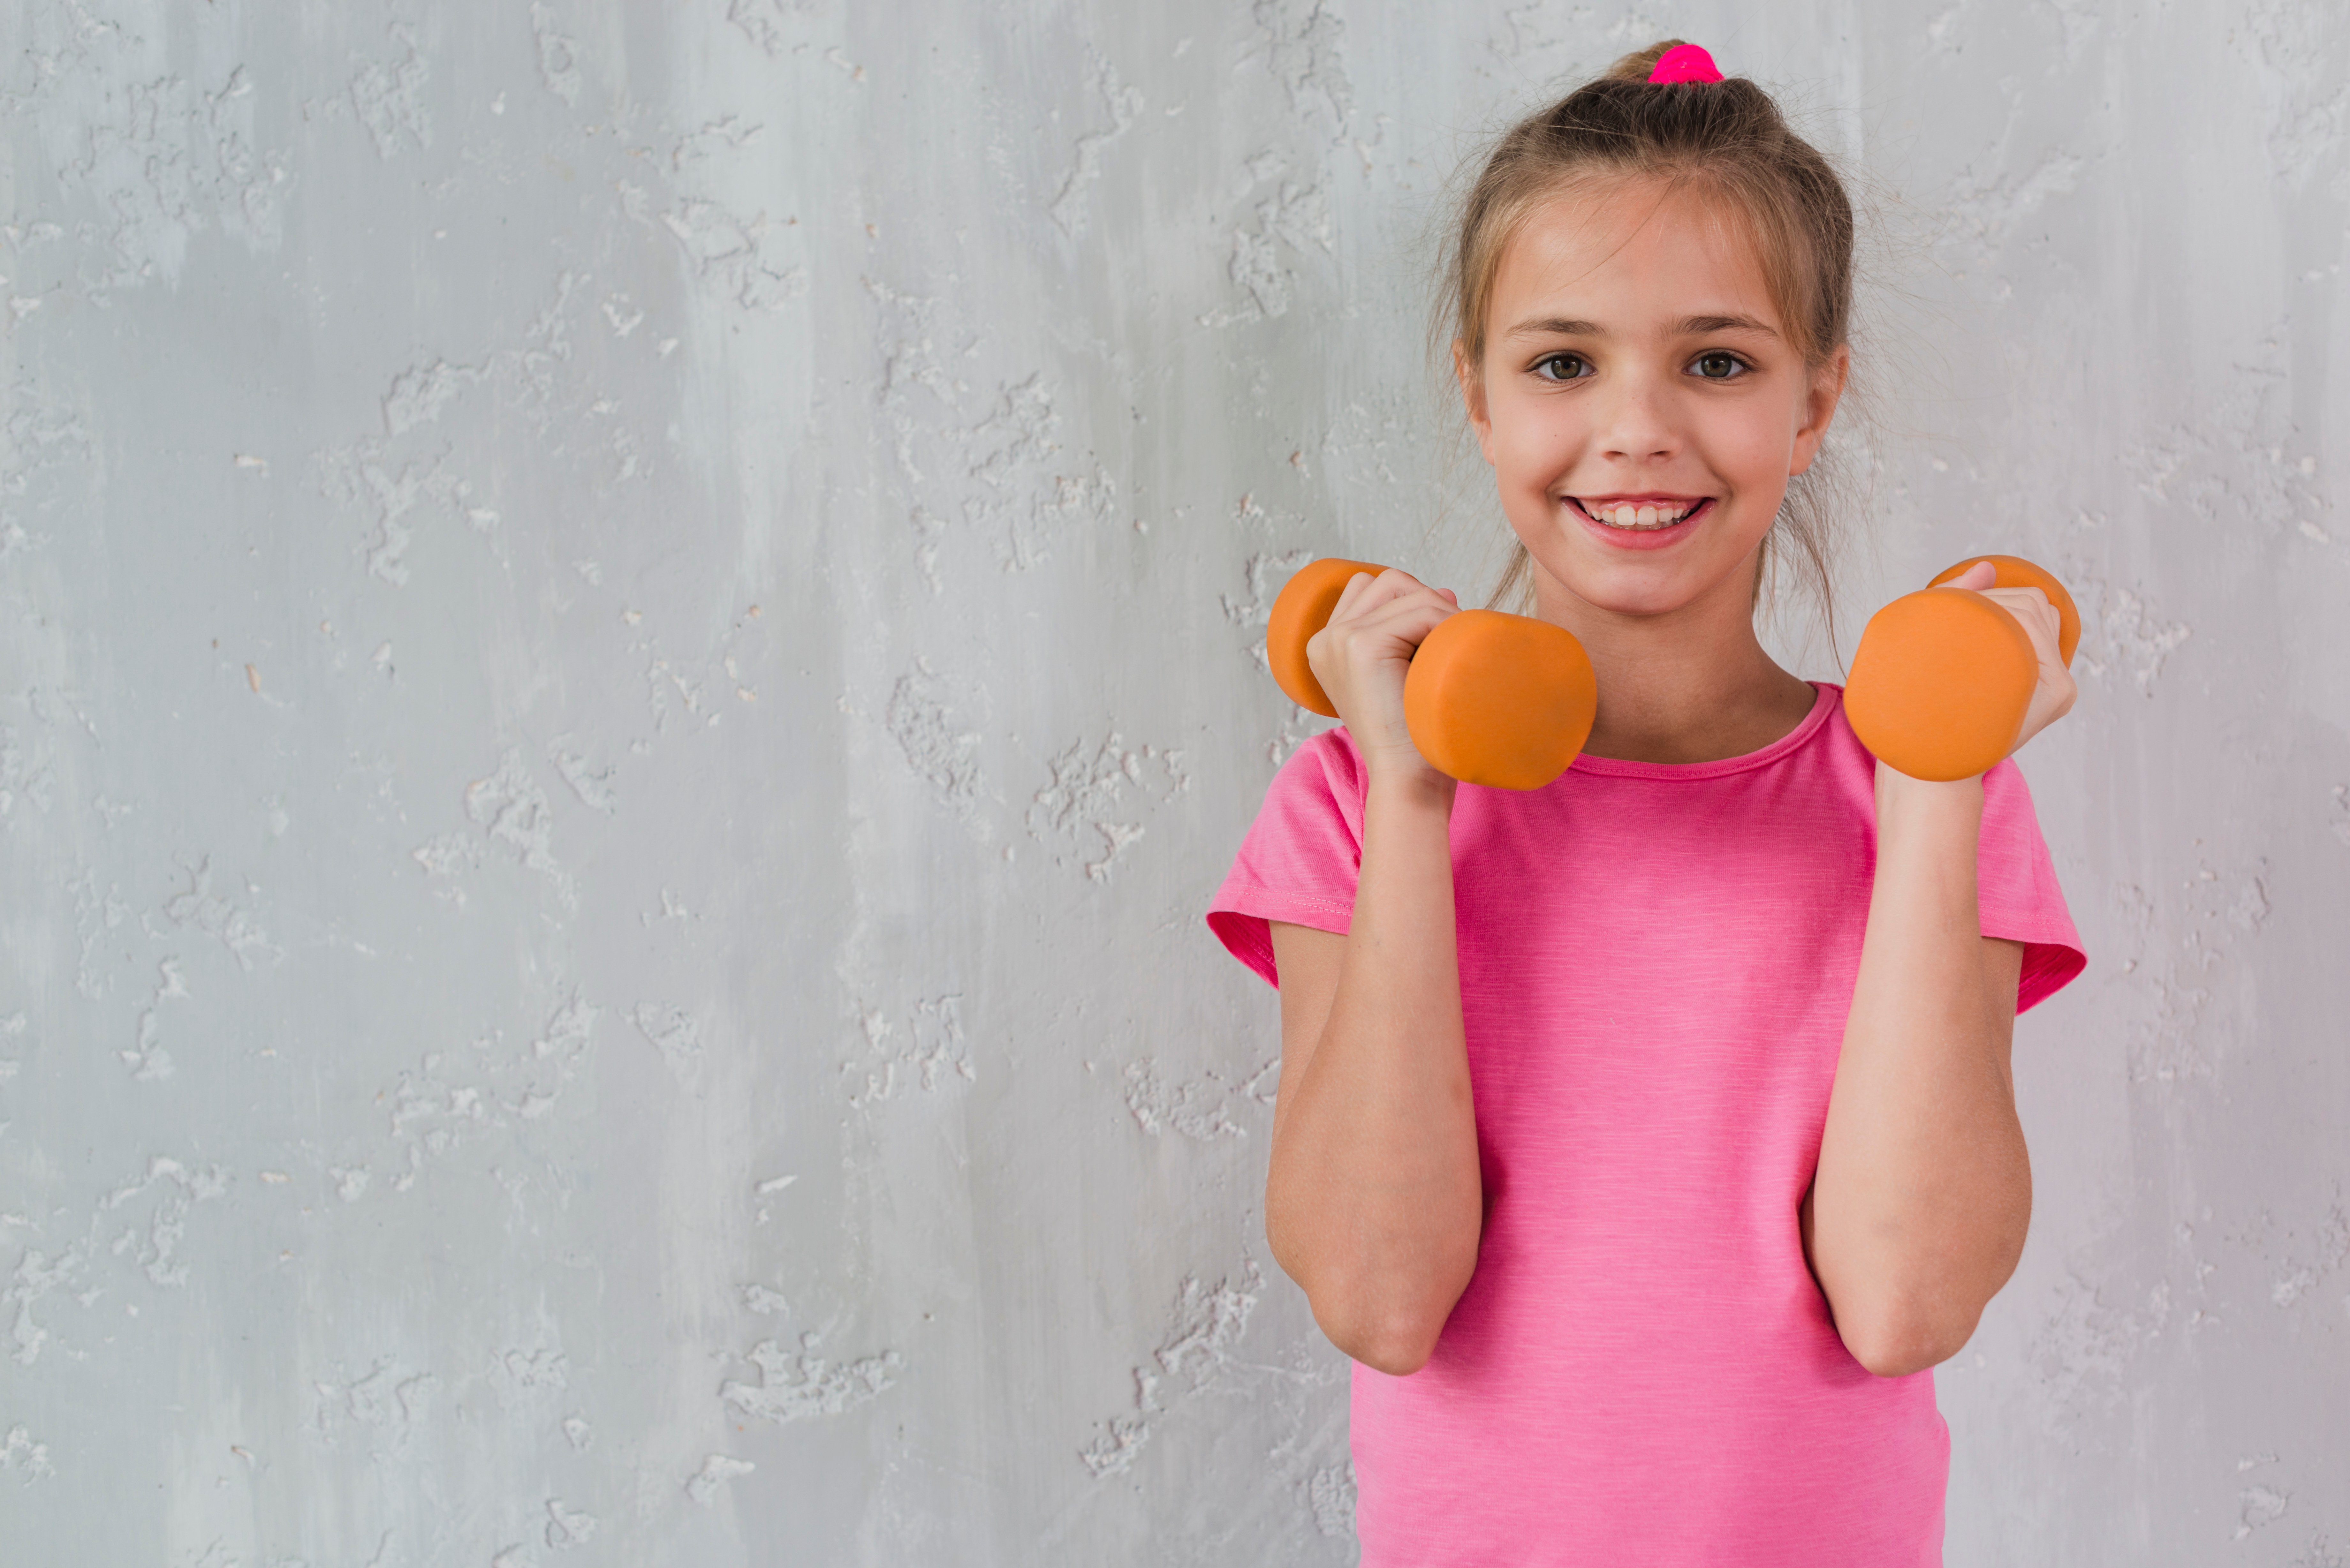 smiling-girl-holding-orange-dumbbell-in-front-of-concrete-wall